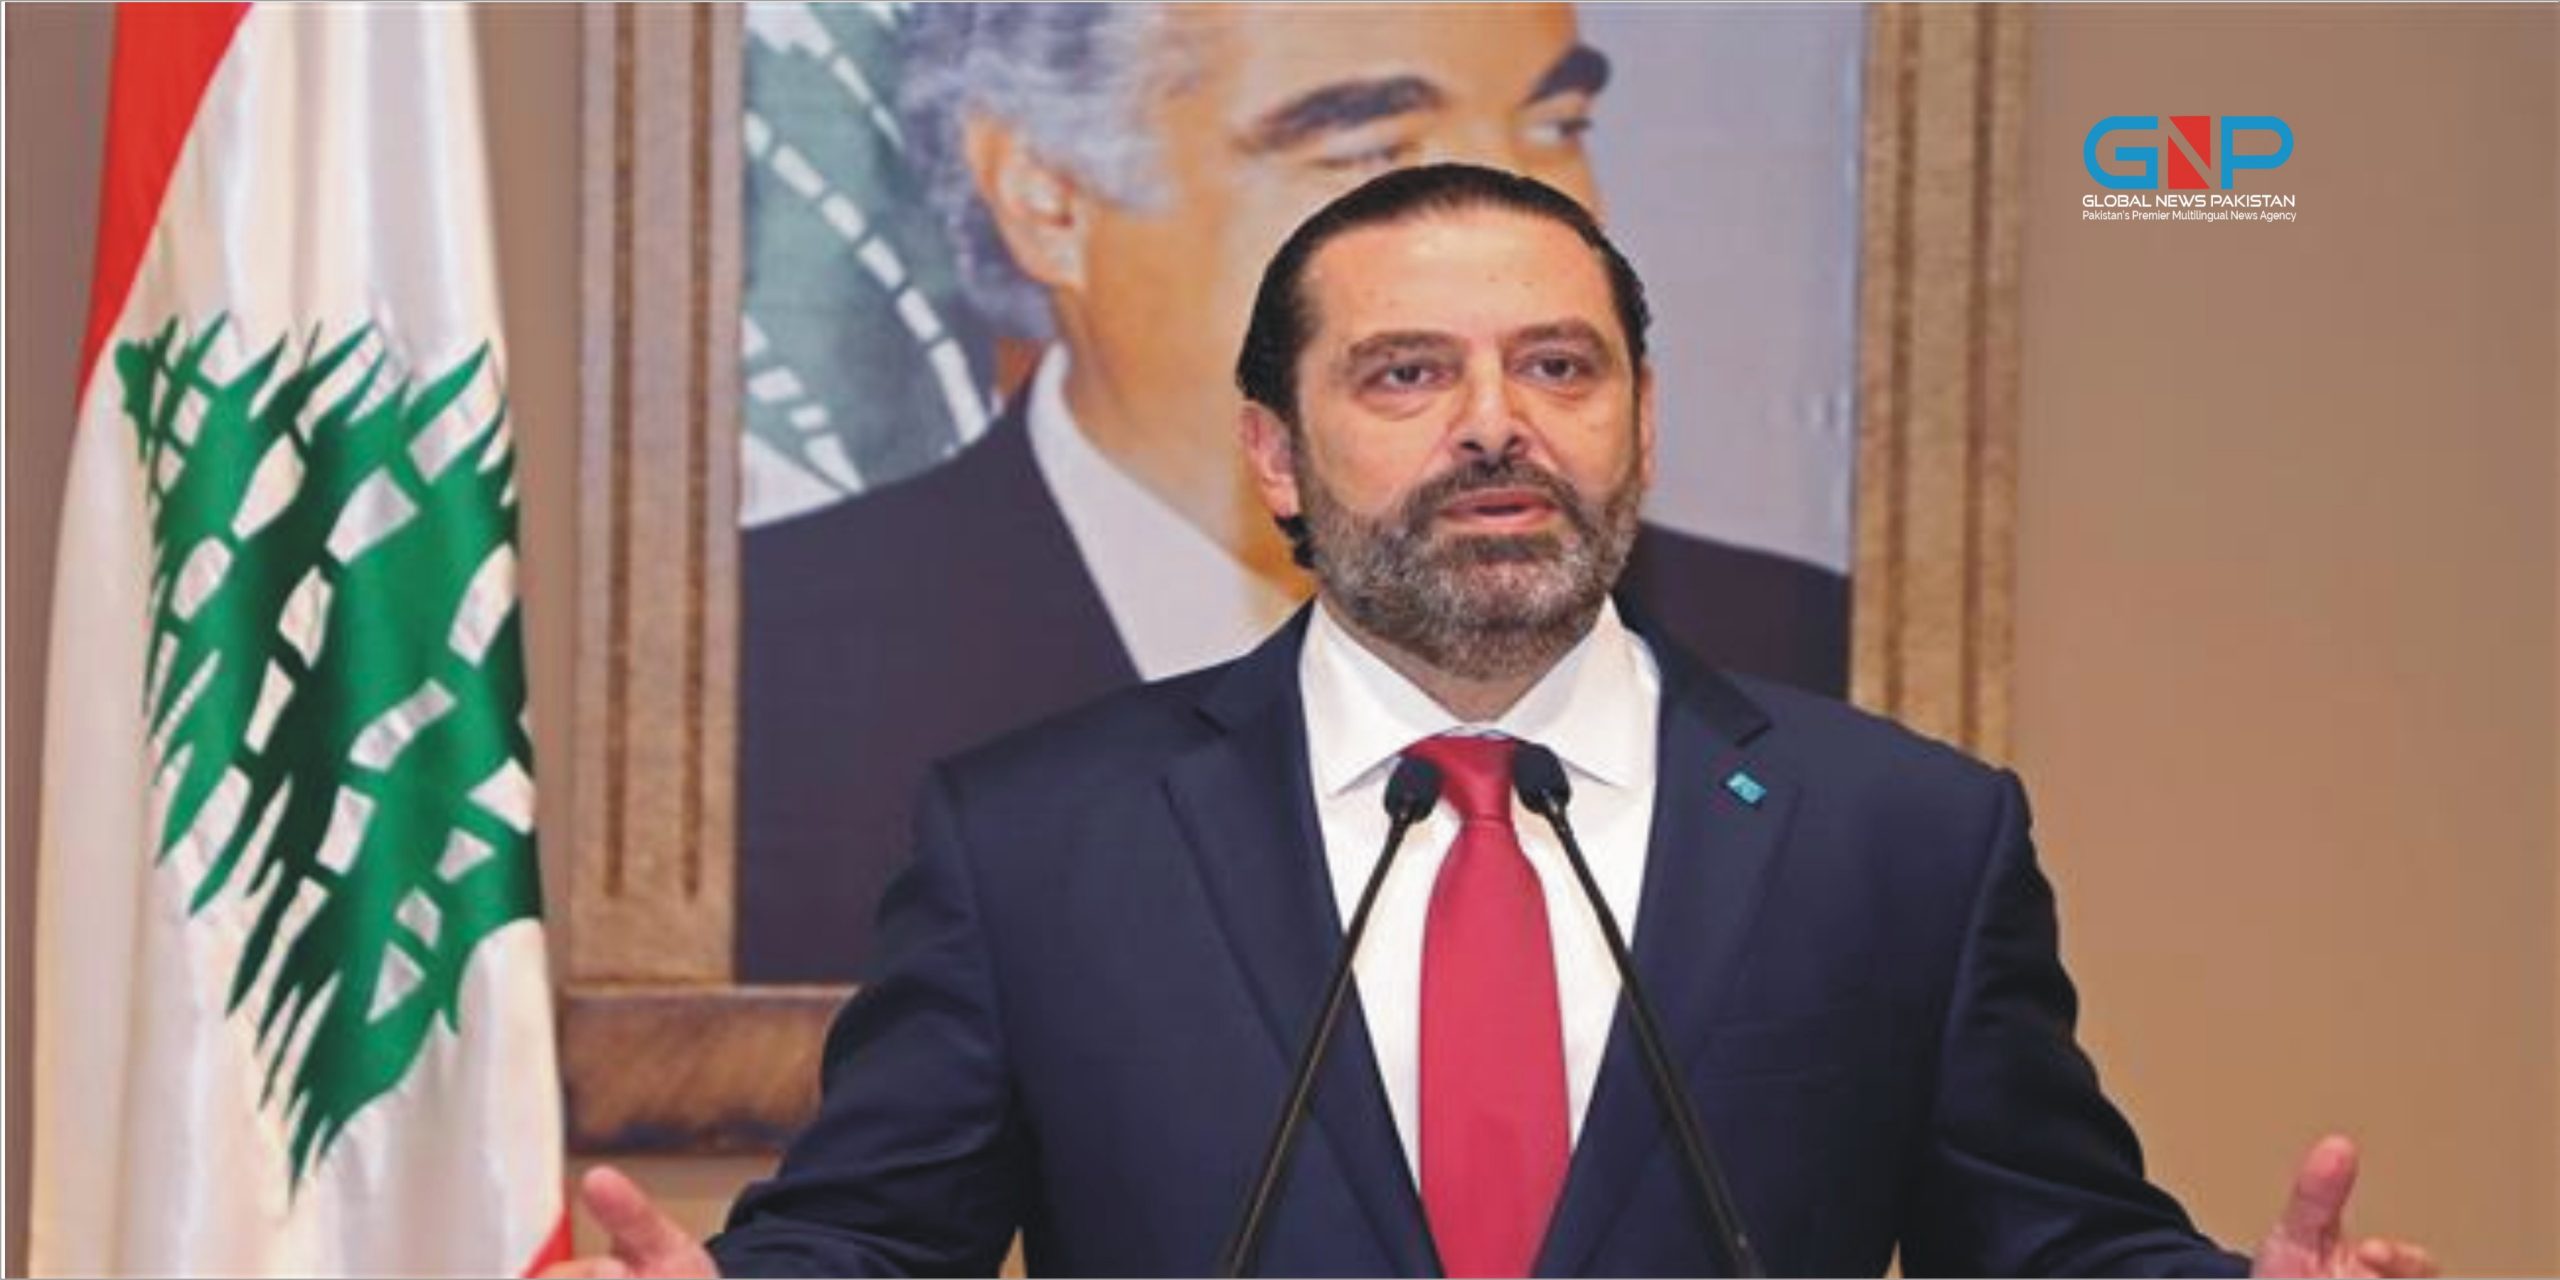 Hariri urged politicians to “stop wasting time” for solving the Lebanese economic crisis scaled